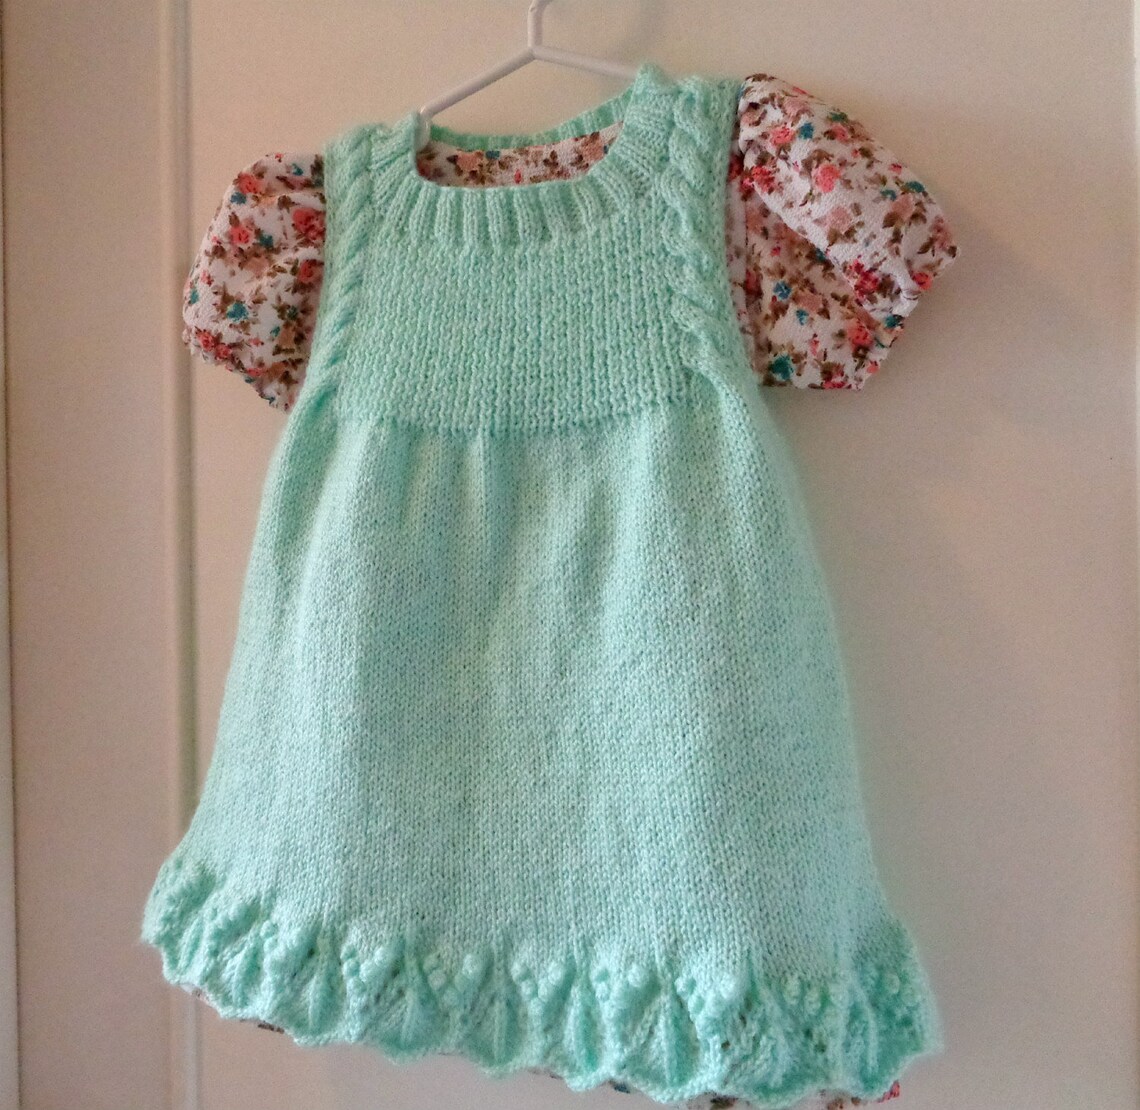 KNITTING PATTERN BABY Dress Lucille Baby Jumper Dress Lace - Etsy